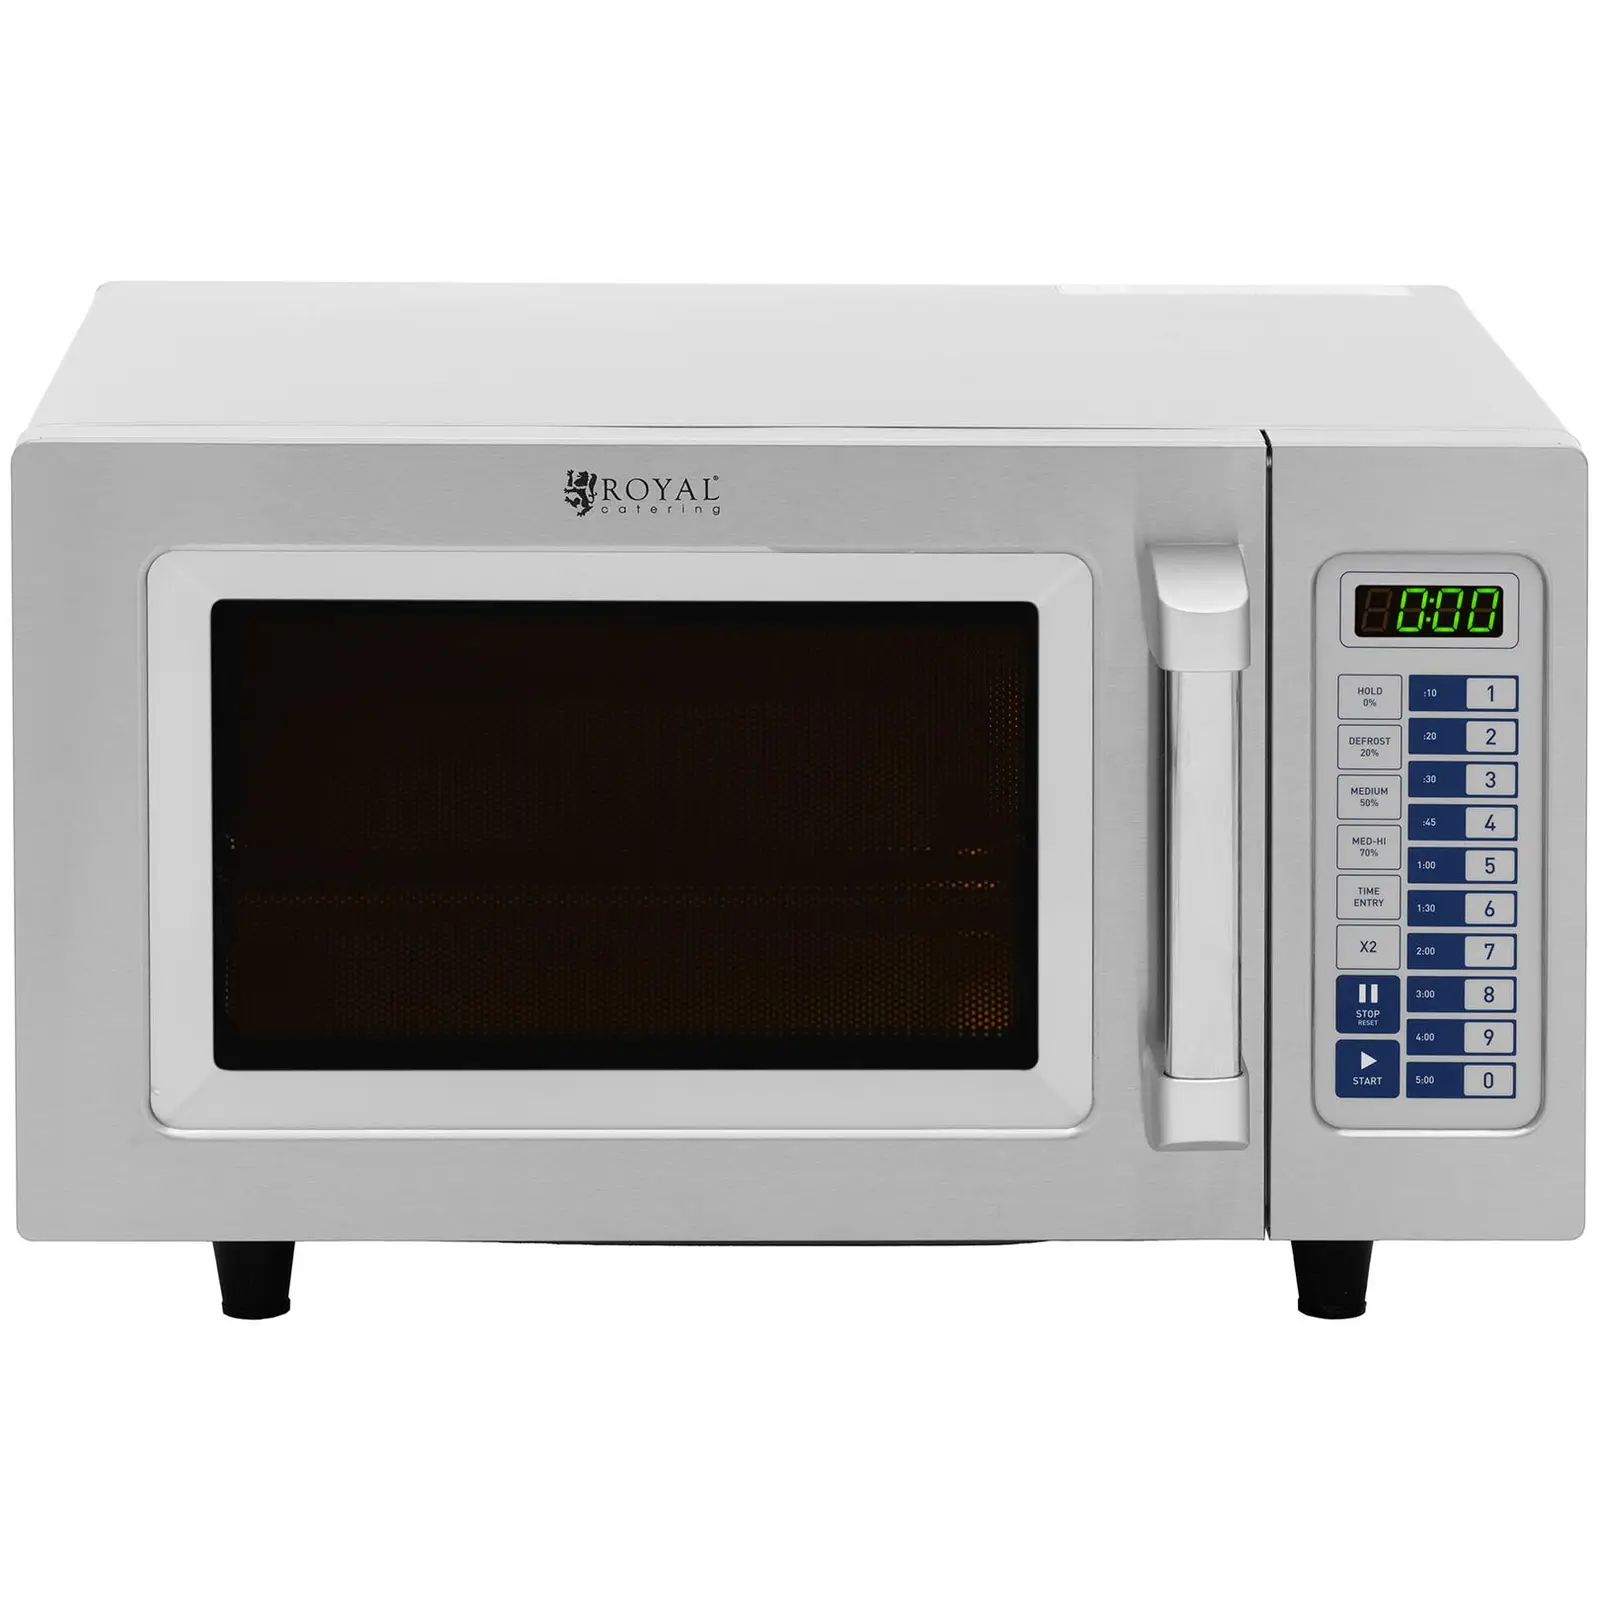 Gastro-Mikrowelle - 1550 W - 25 L - Royal Catering